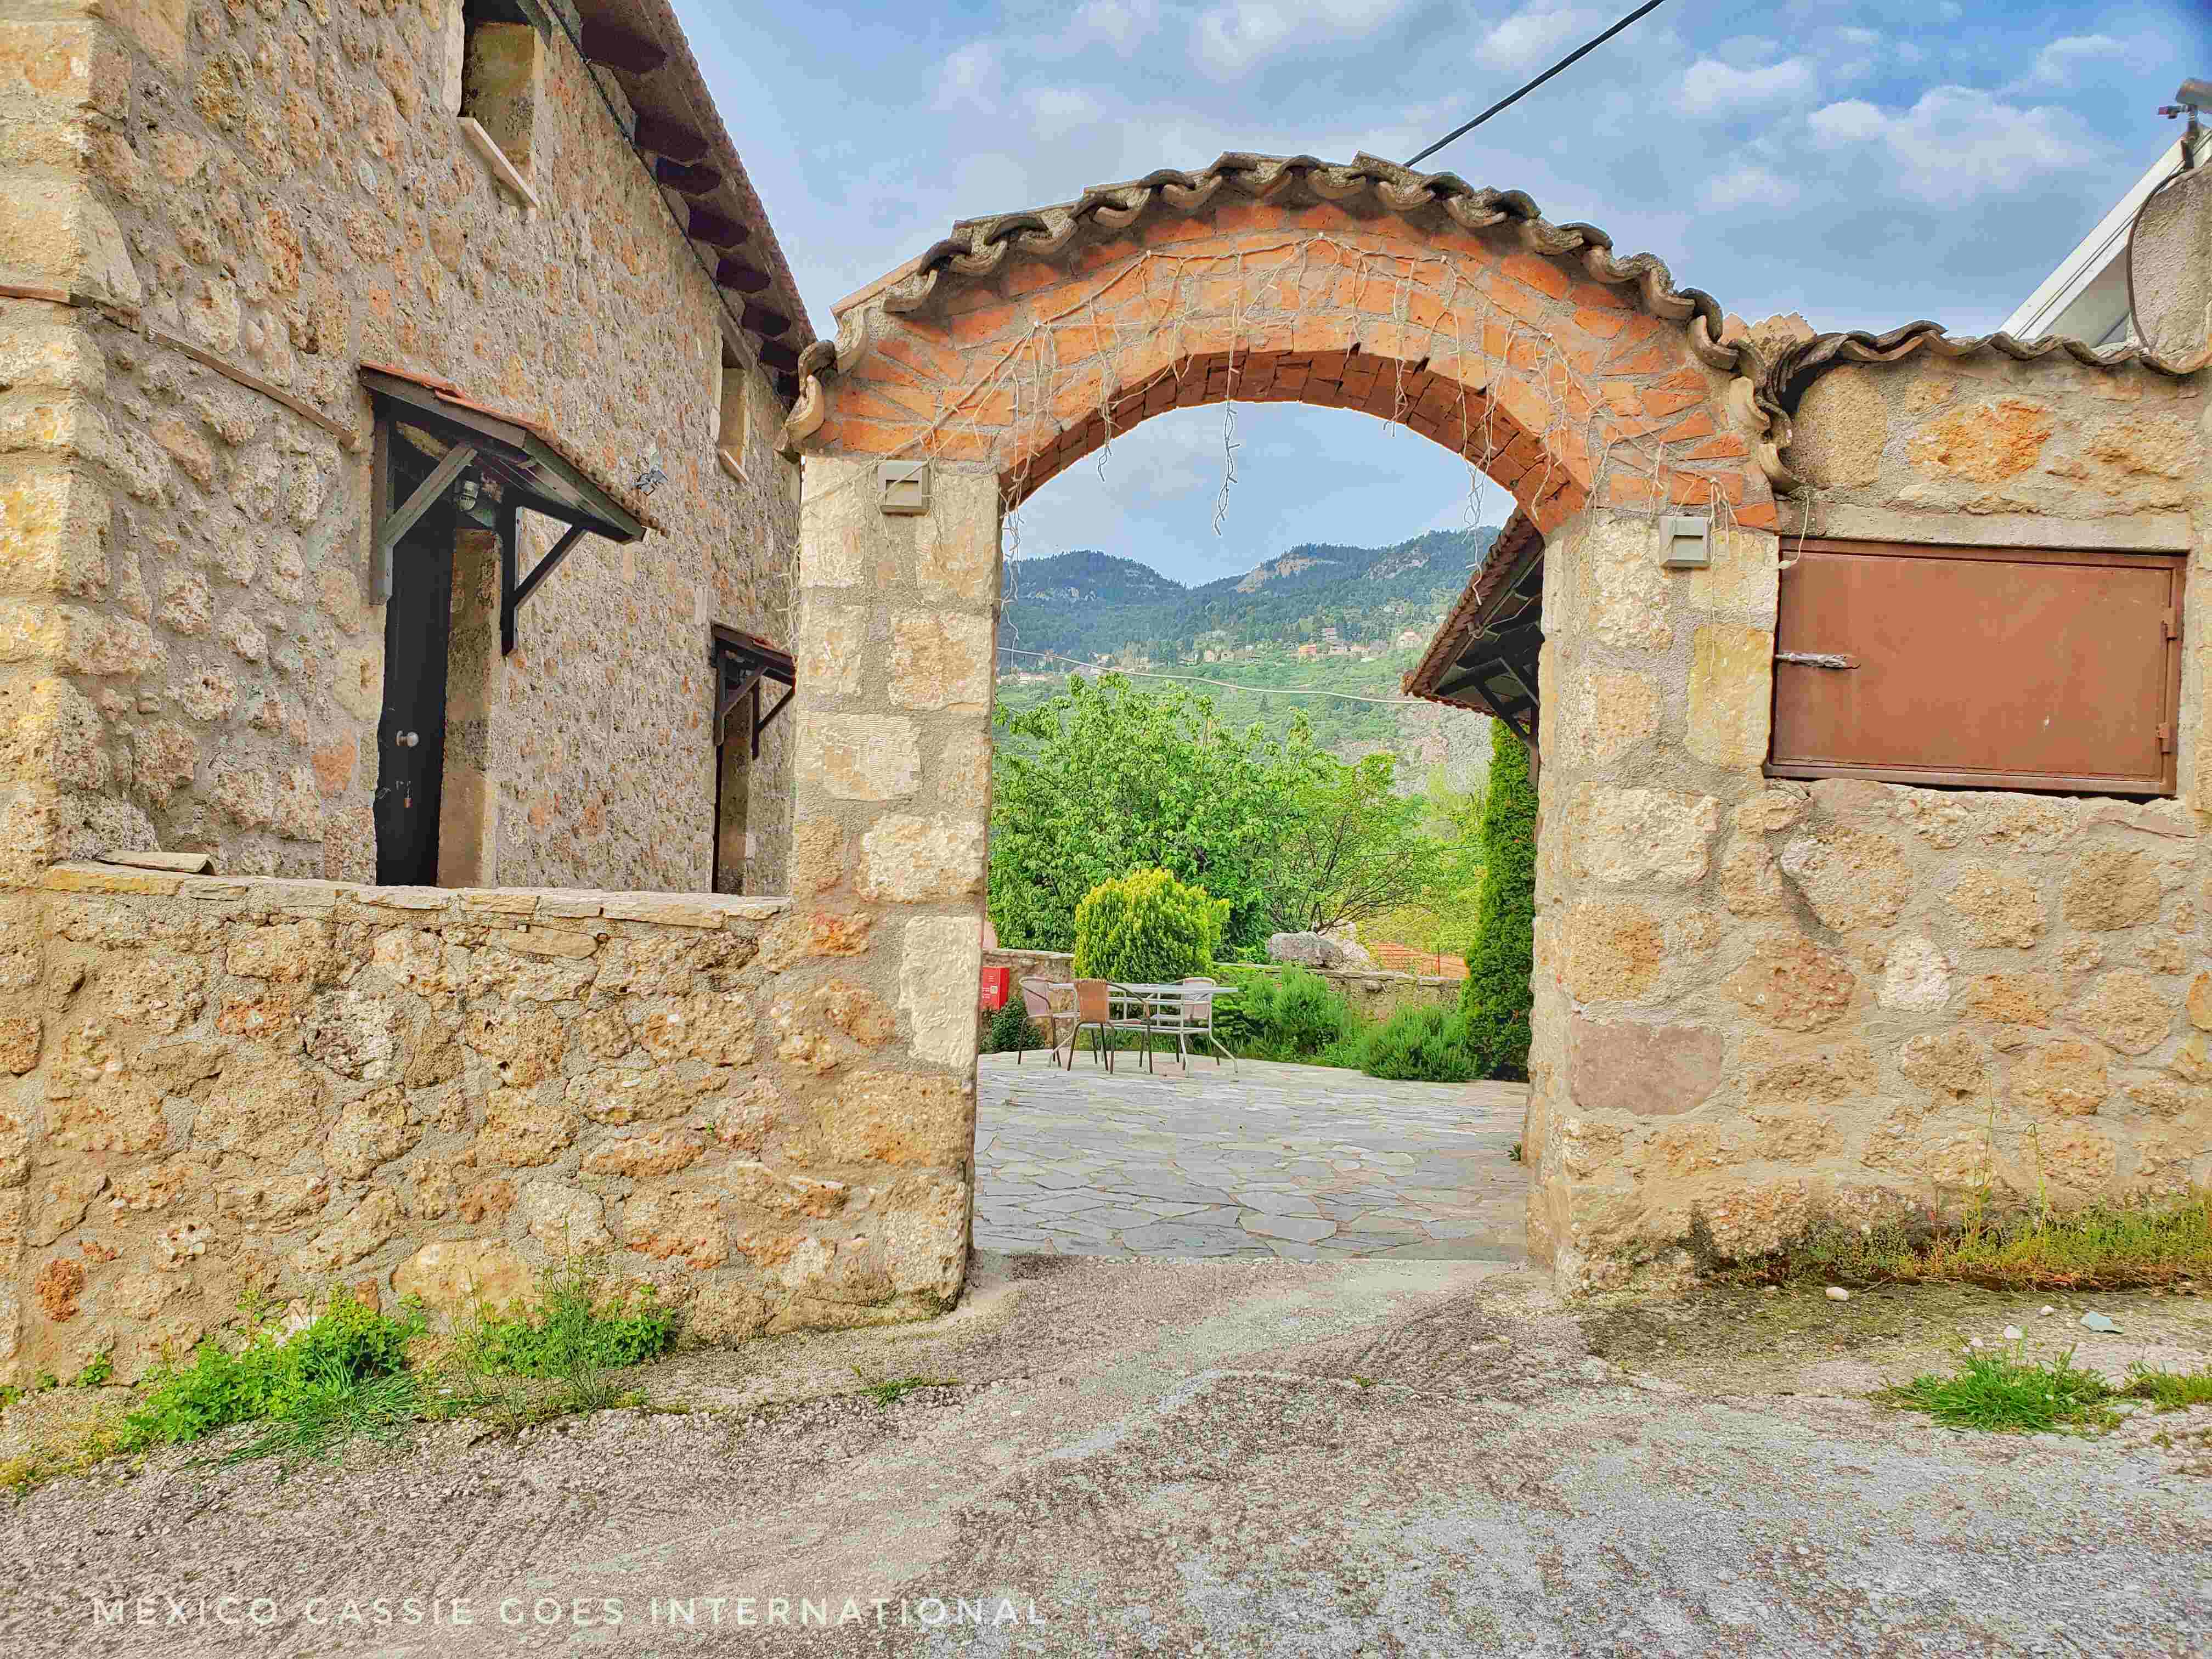 view through archway -mountains and greenery in background